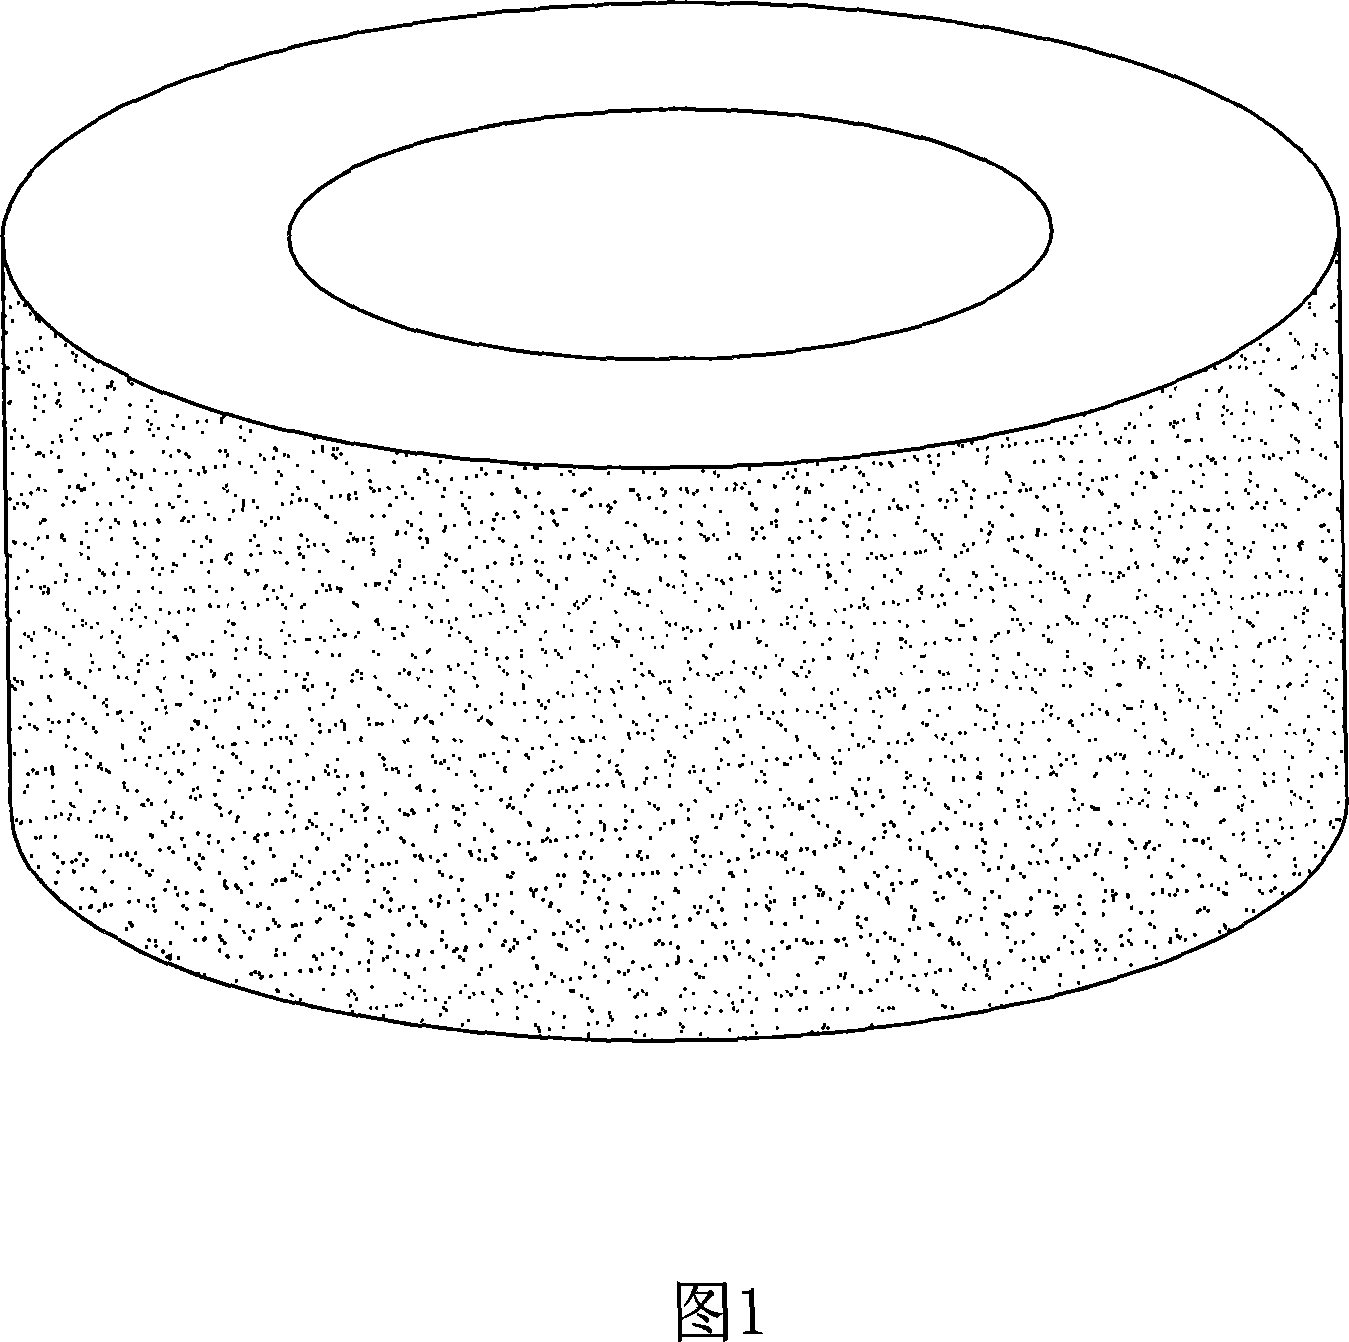 Producing method of stamp forging hardware products